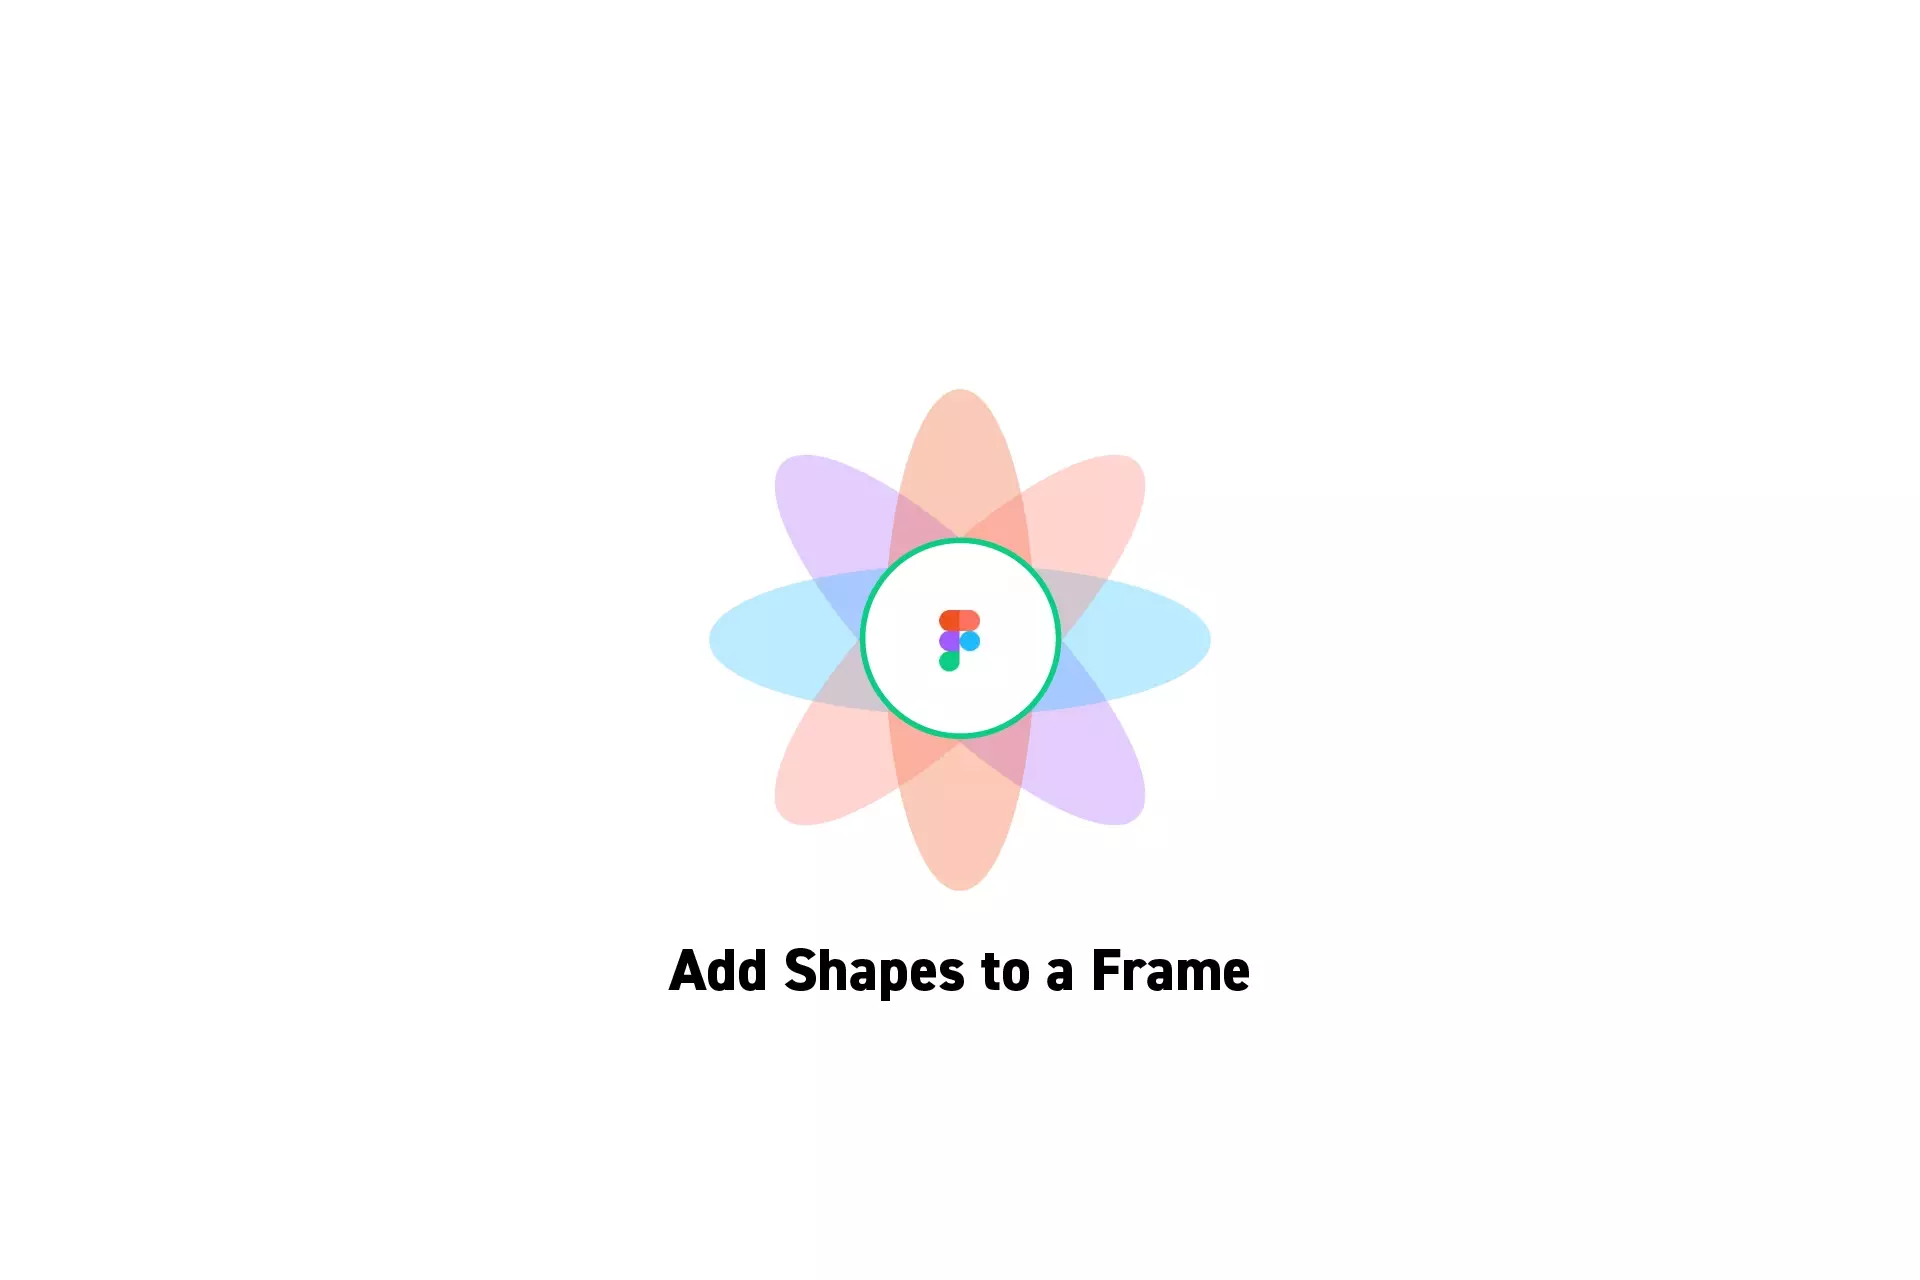 A flower that represents Figma with the text “Add Shapes to a Frame” beneath it.